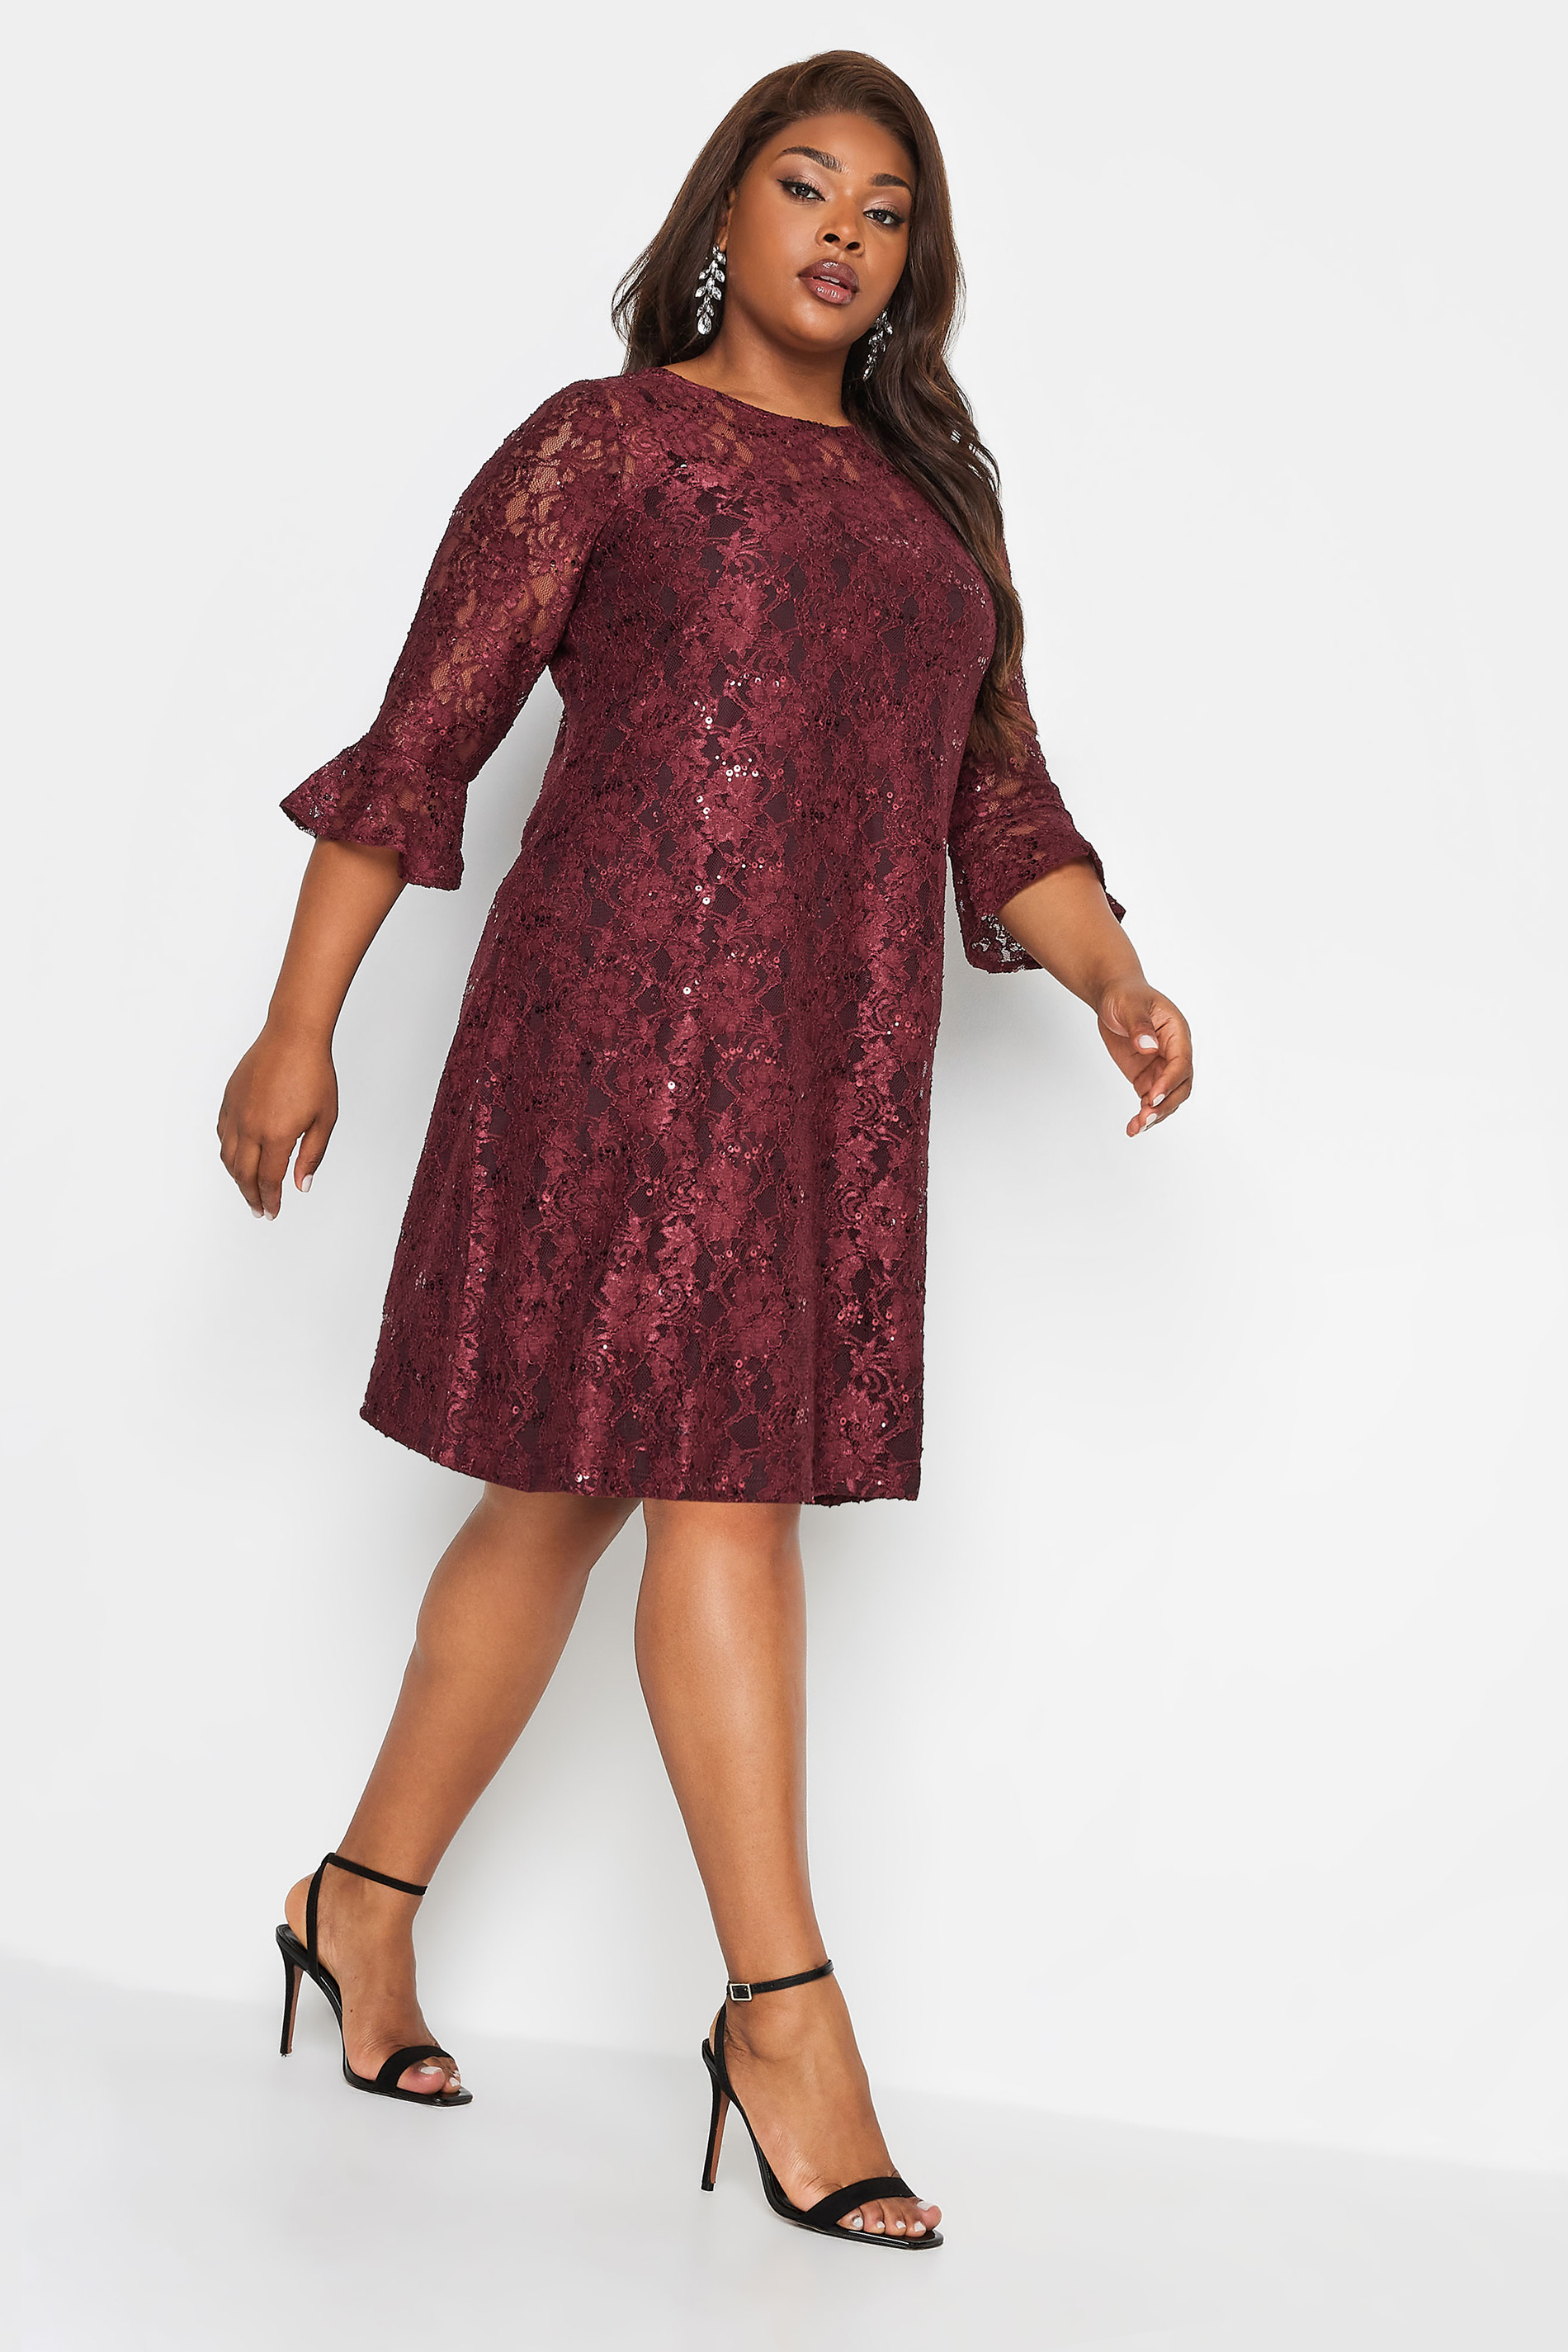 A woman wearing YOURS Curve Burgundy Red Lace Sequin Embellished Swing Dress